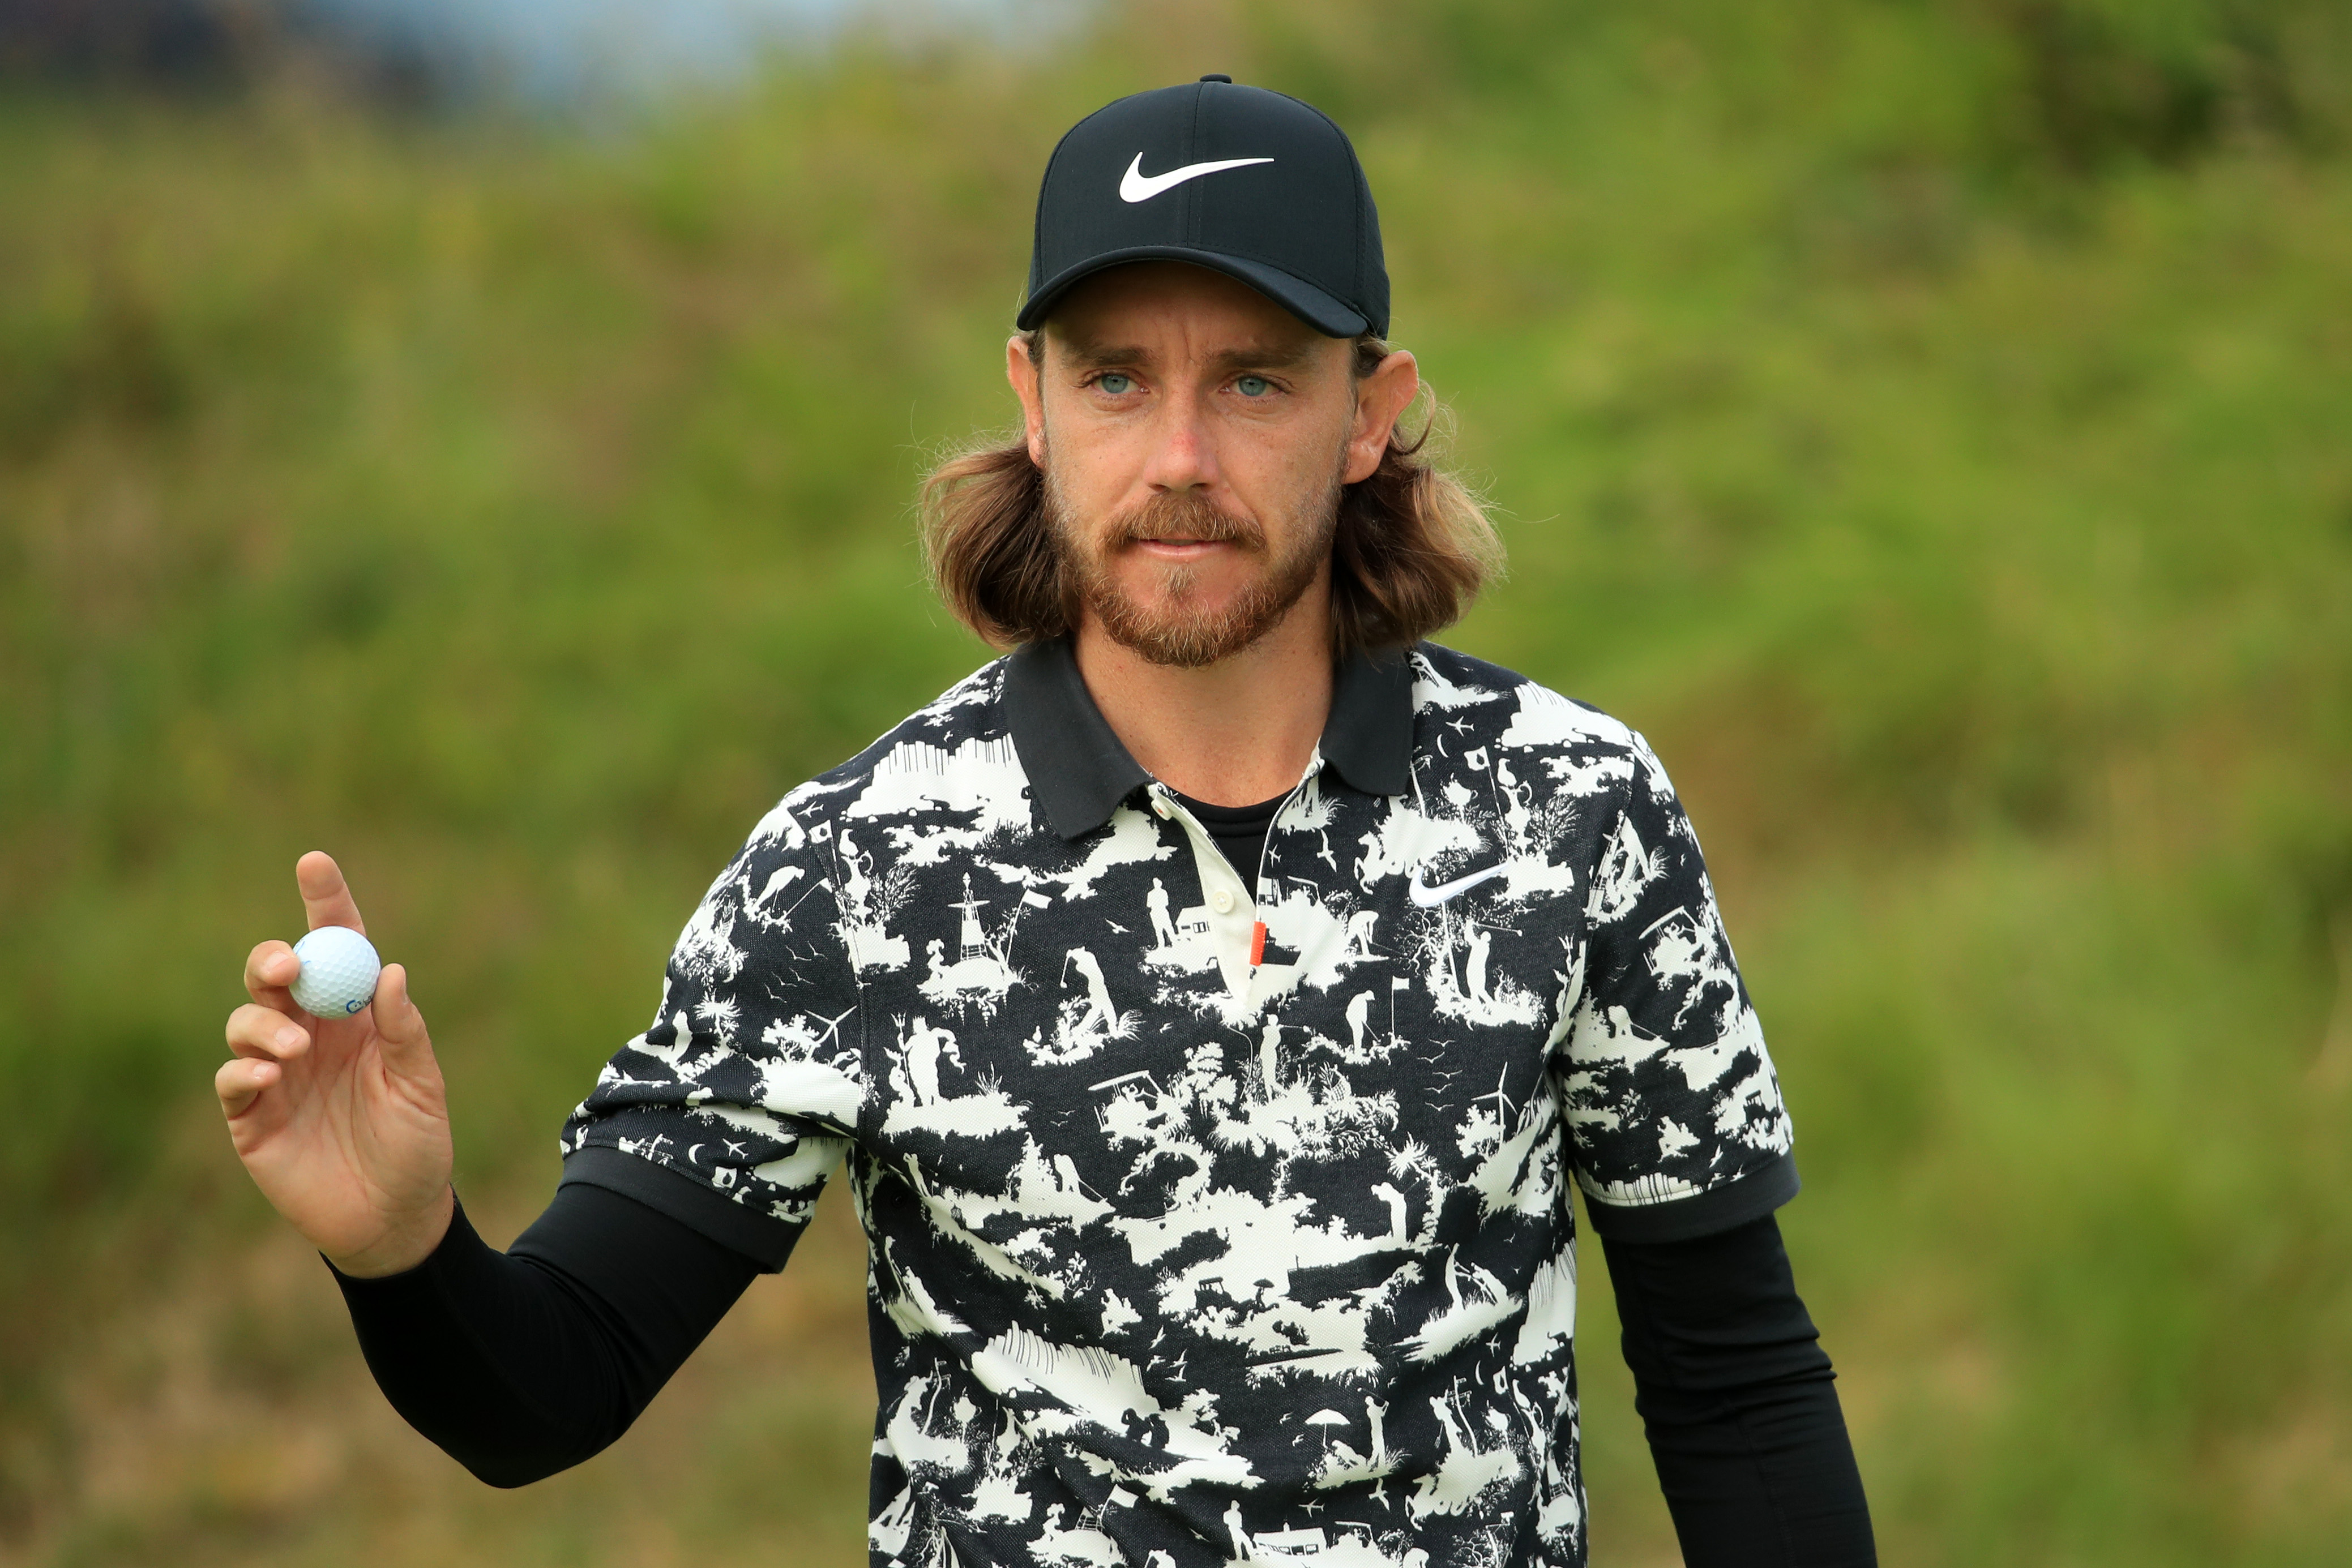 engineering bed Beeldhouwwerk British Open 2019: The story of the black-and-white print Nike golf shirt |  Golf Equipment: Clubs, Balls, Bags | Golf Digest